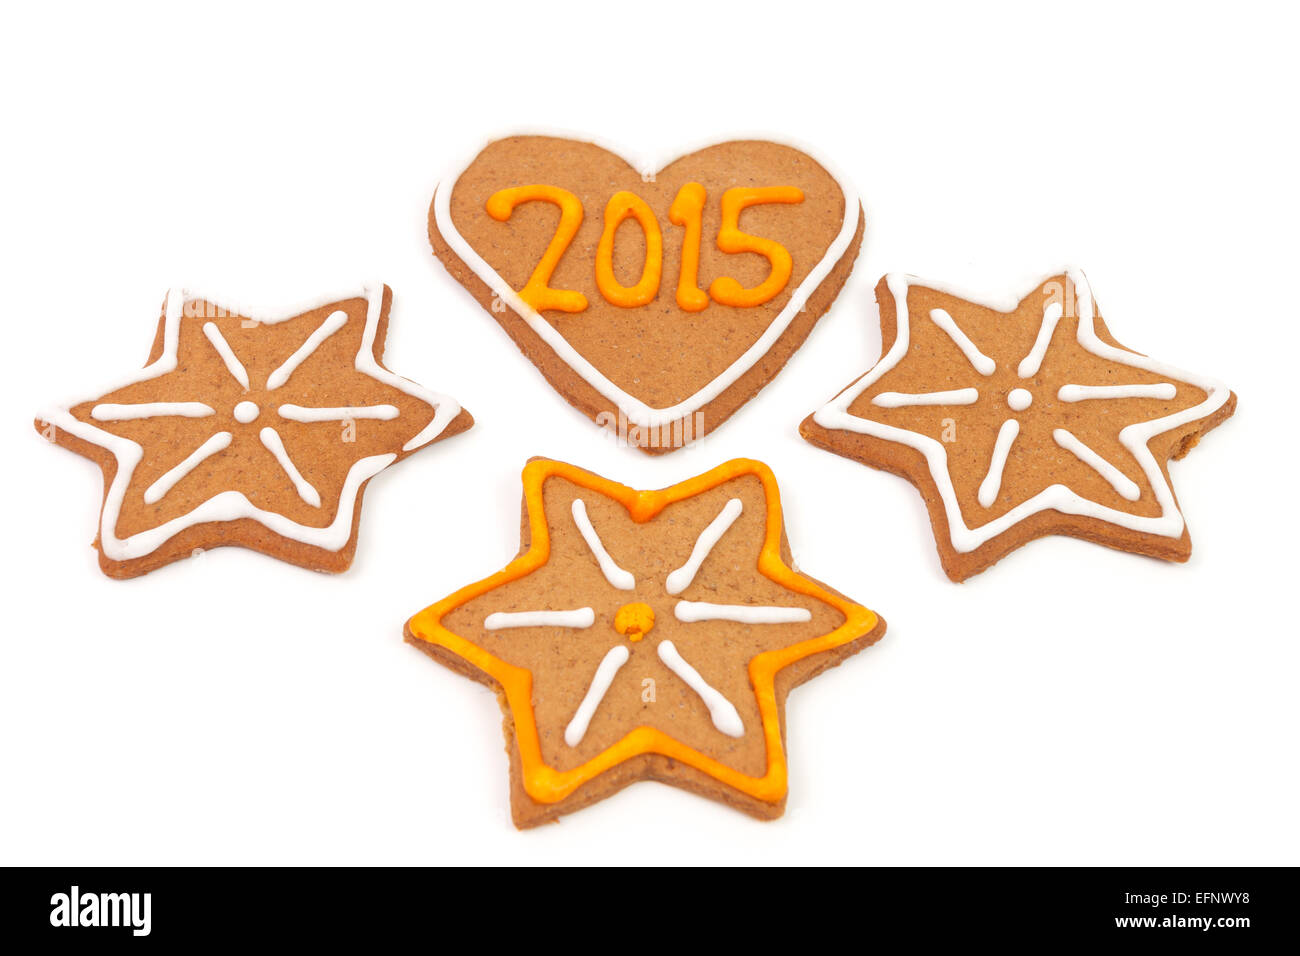 Homemade new year cookies with 2015 number. Isolated on white background Stock Photo